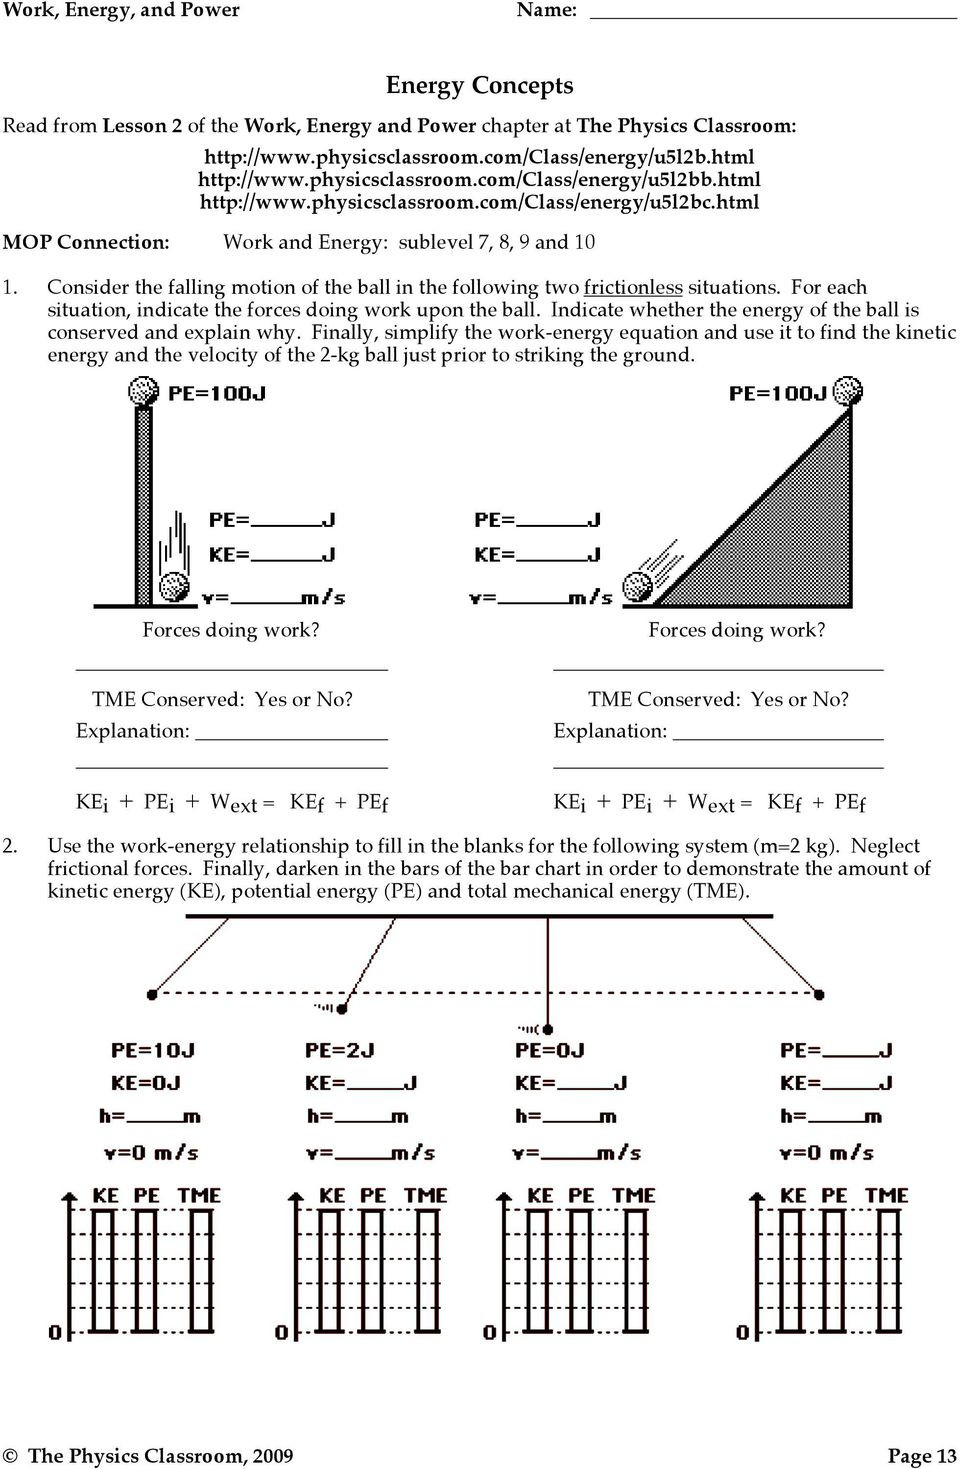 Work Energy and Power Worksheet Work Energy Bar Charts Pdf Free Download